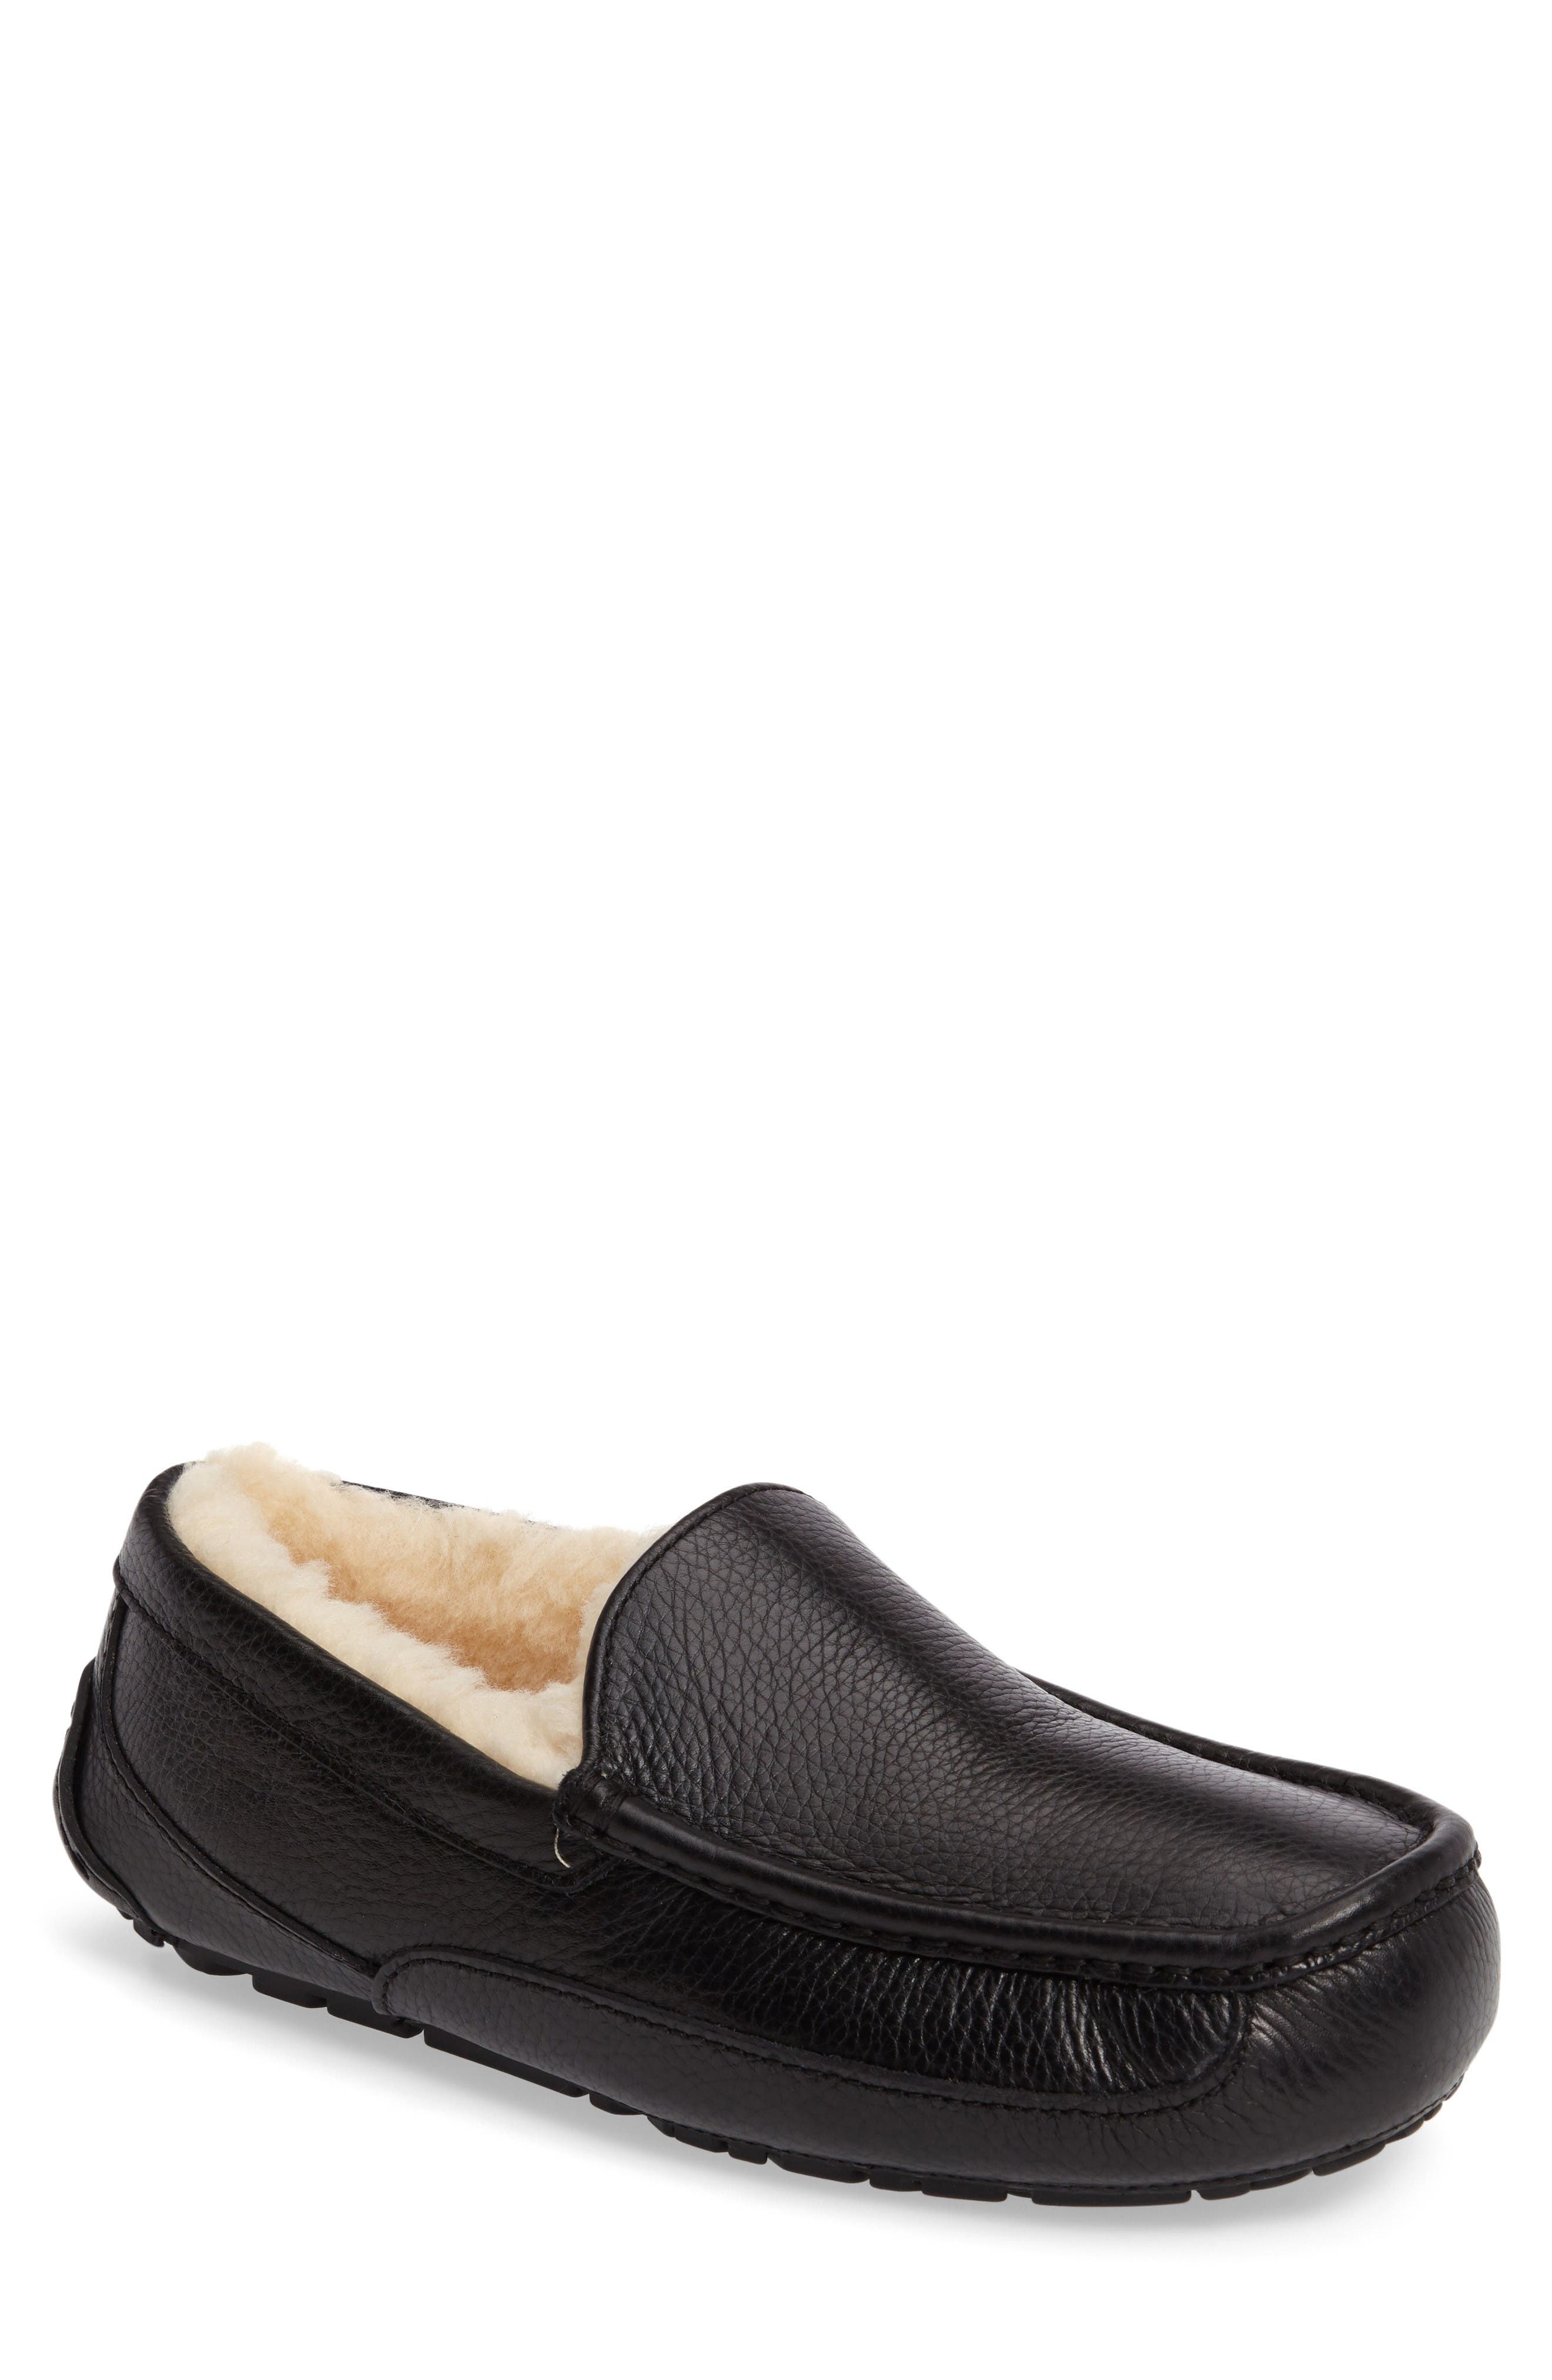 mens leather slippers nordstrom